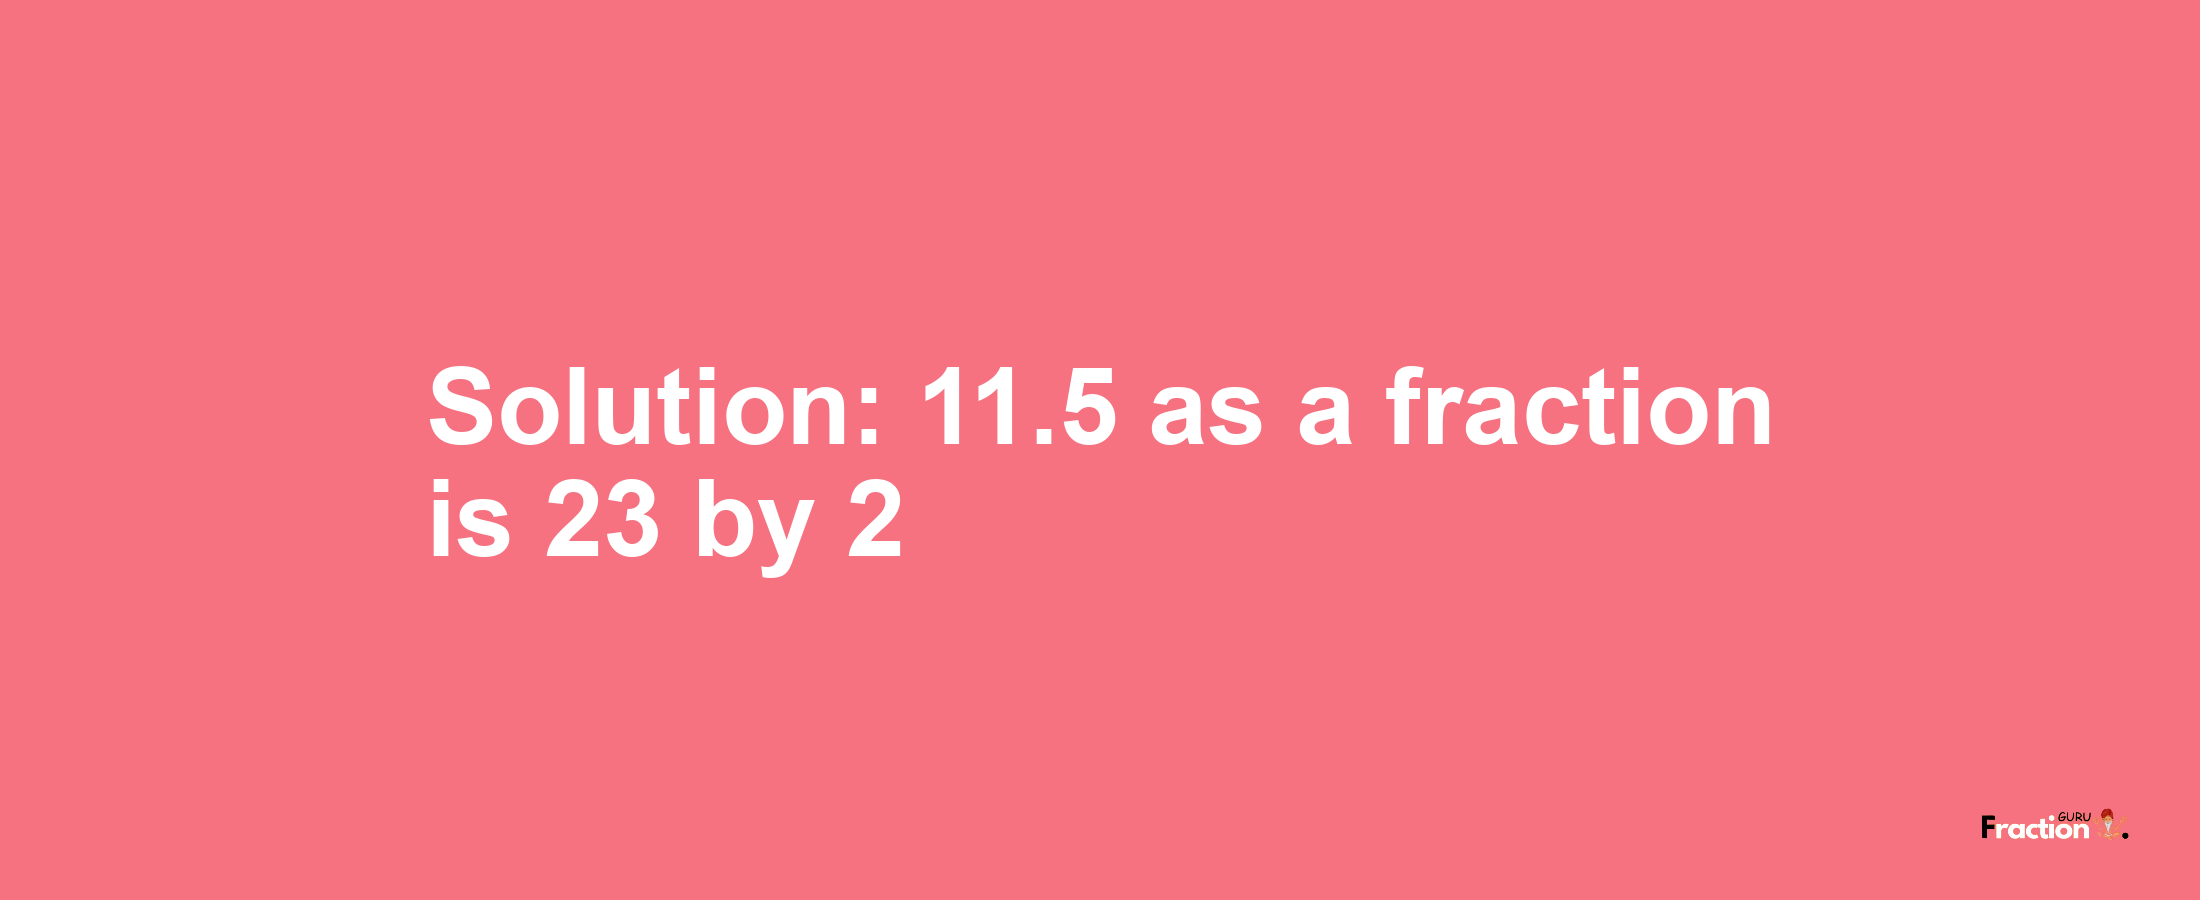 Solution:11.5 as a fraction is 23/2